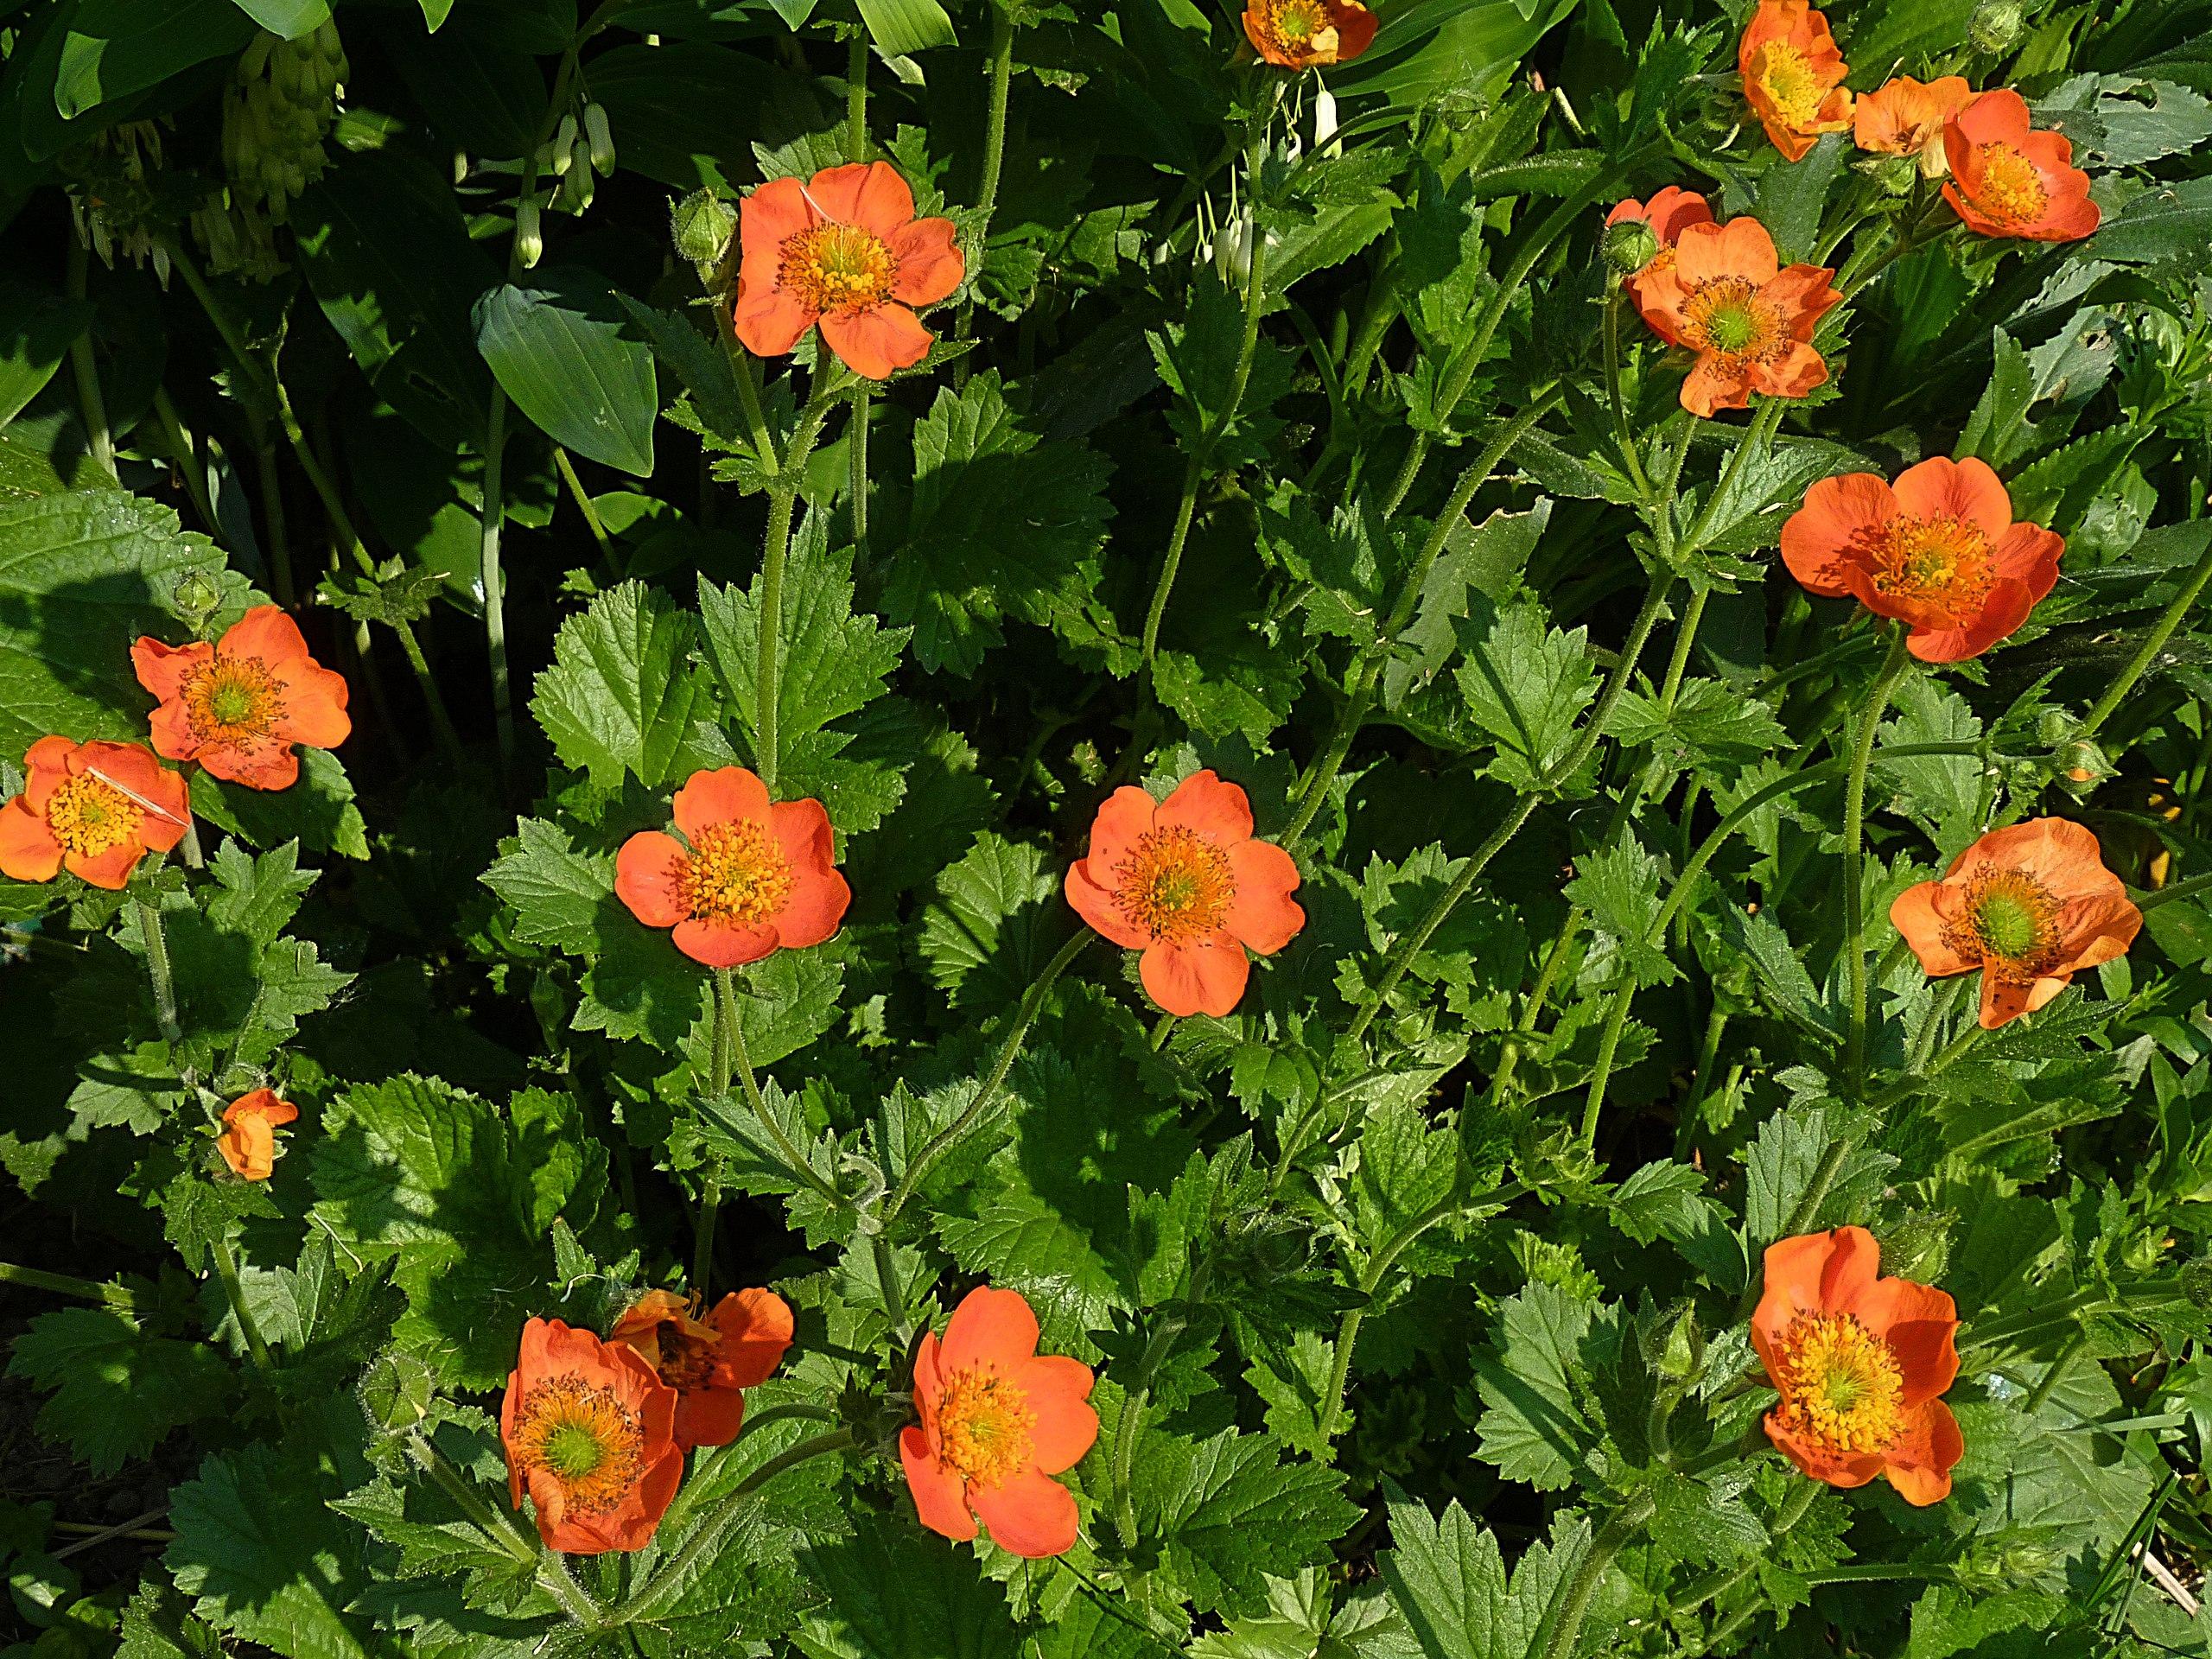 Orange flower with yellow anthers, dark-green leaves and stems.